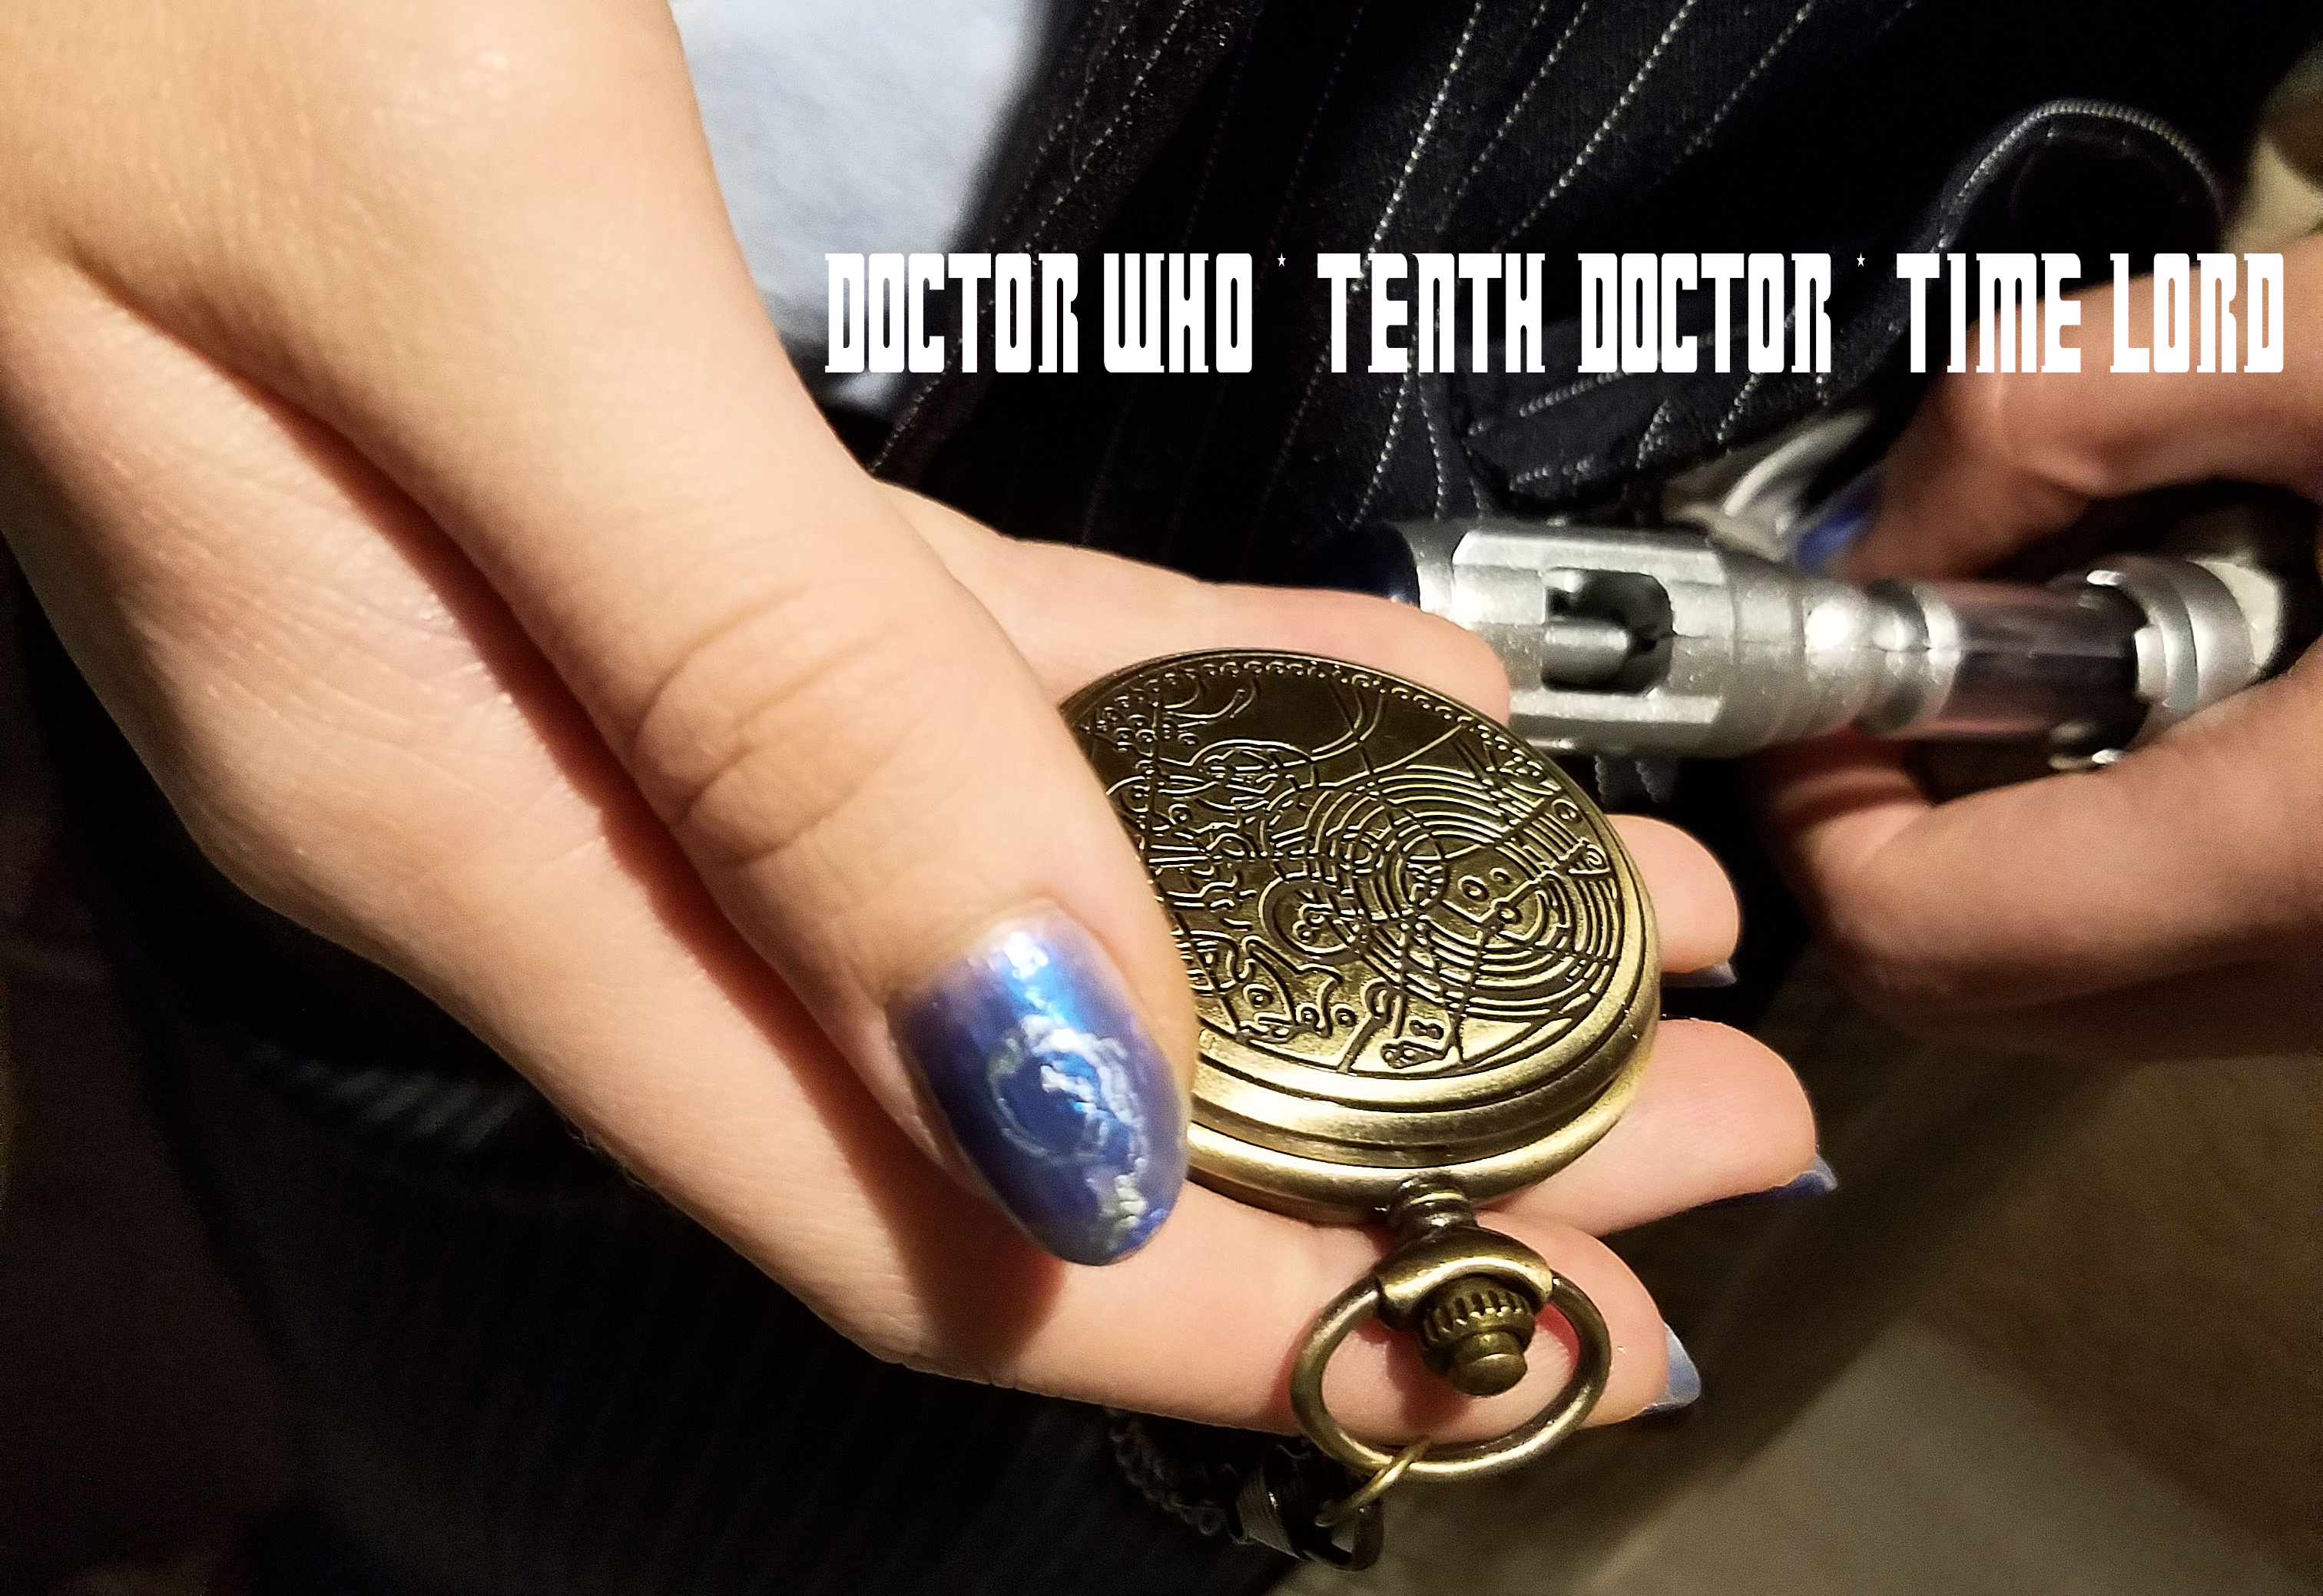 Doctor Who Tenth Doctor Costume Time Lord